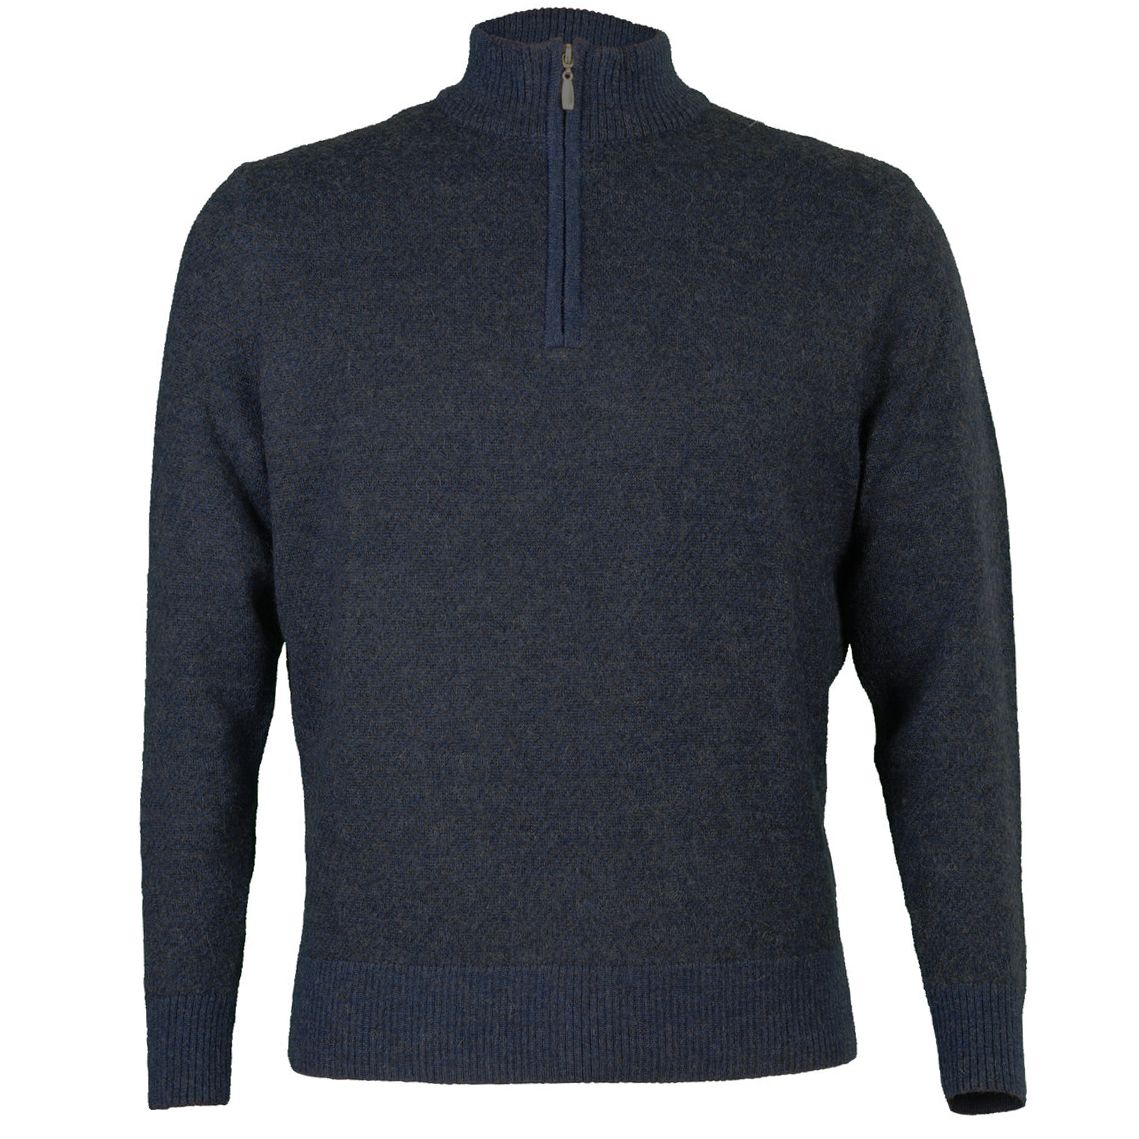 Royal Alpaca Diagonal Jacquard Half-Zip Lightweight Sweater in Midnight and Charcoal Heather by Peru Unlimited